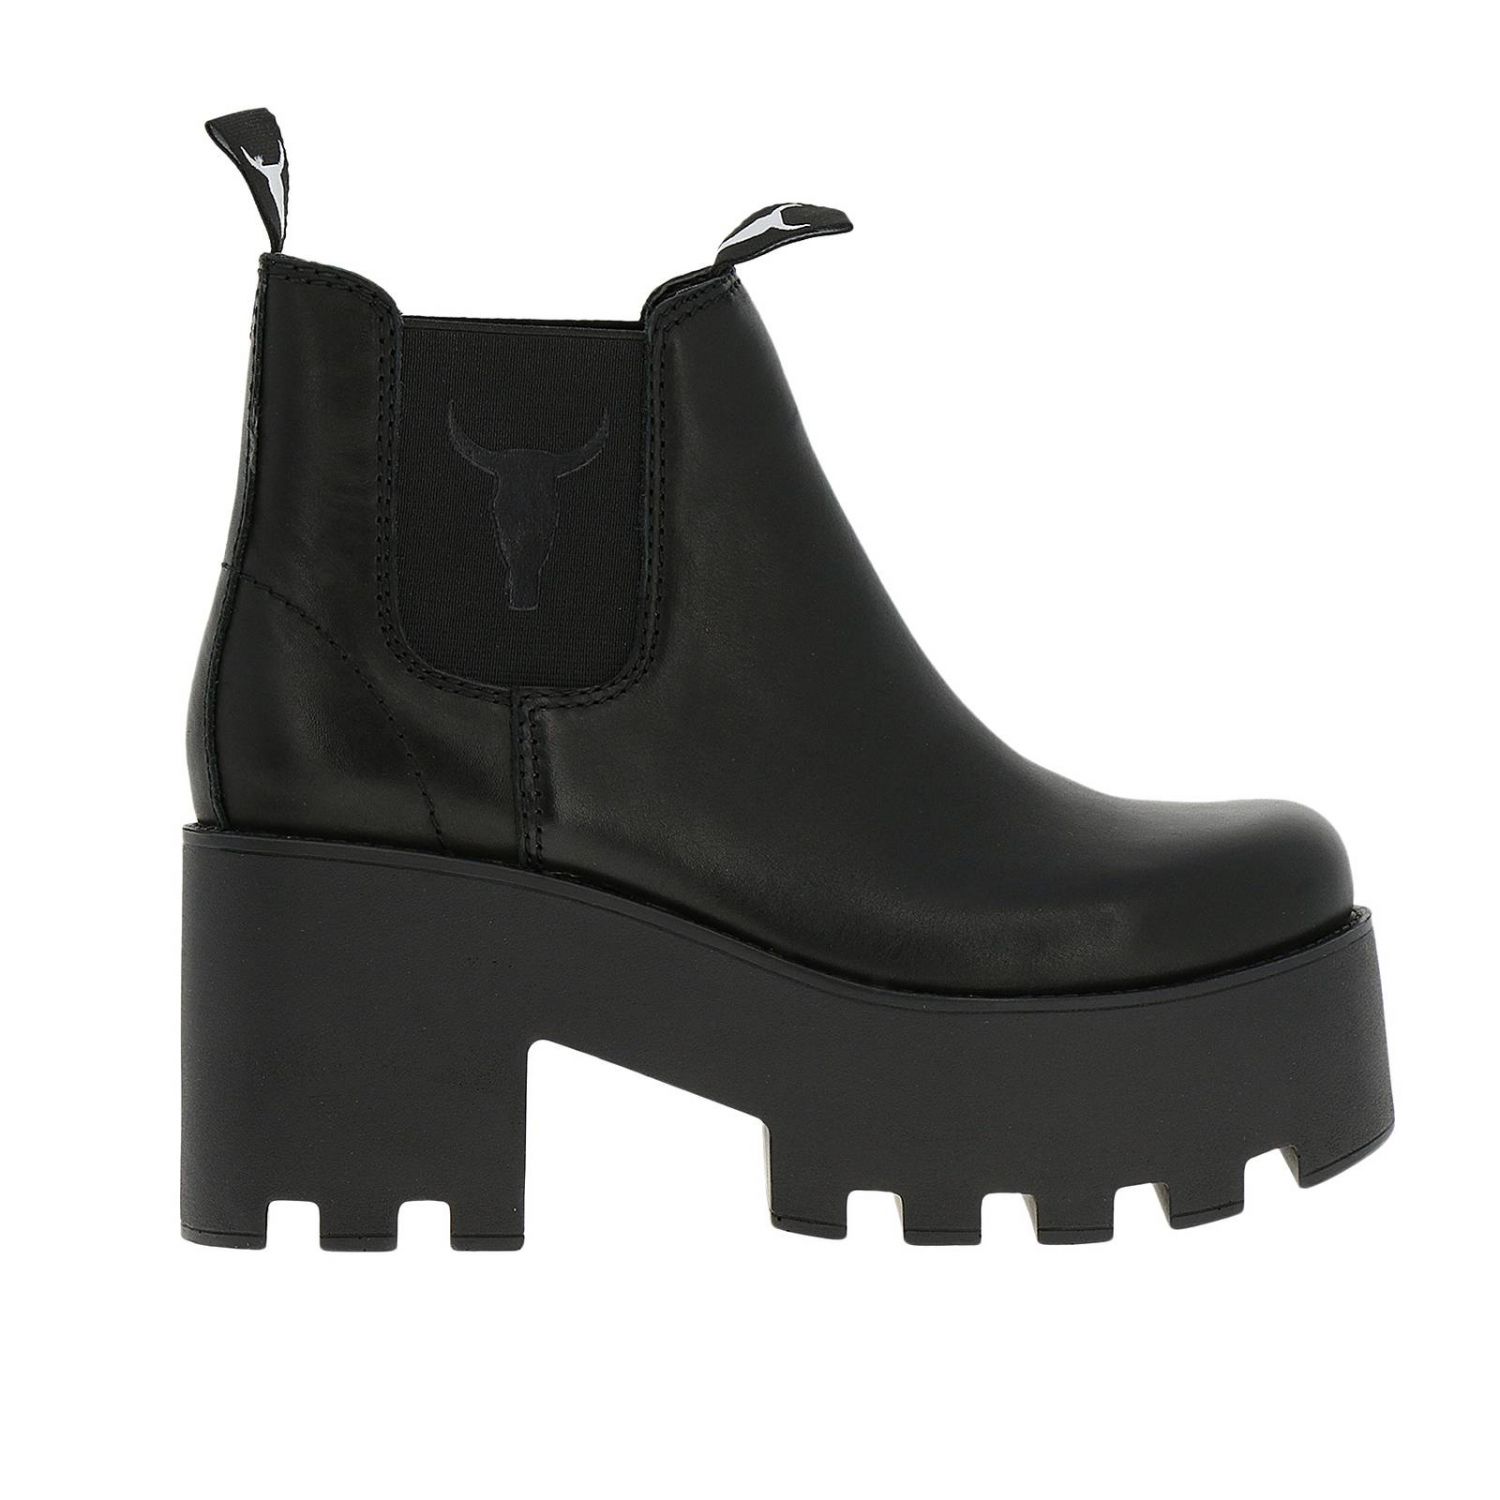 Buy > windsor smith chelsea boots > in stock